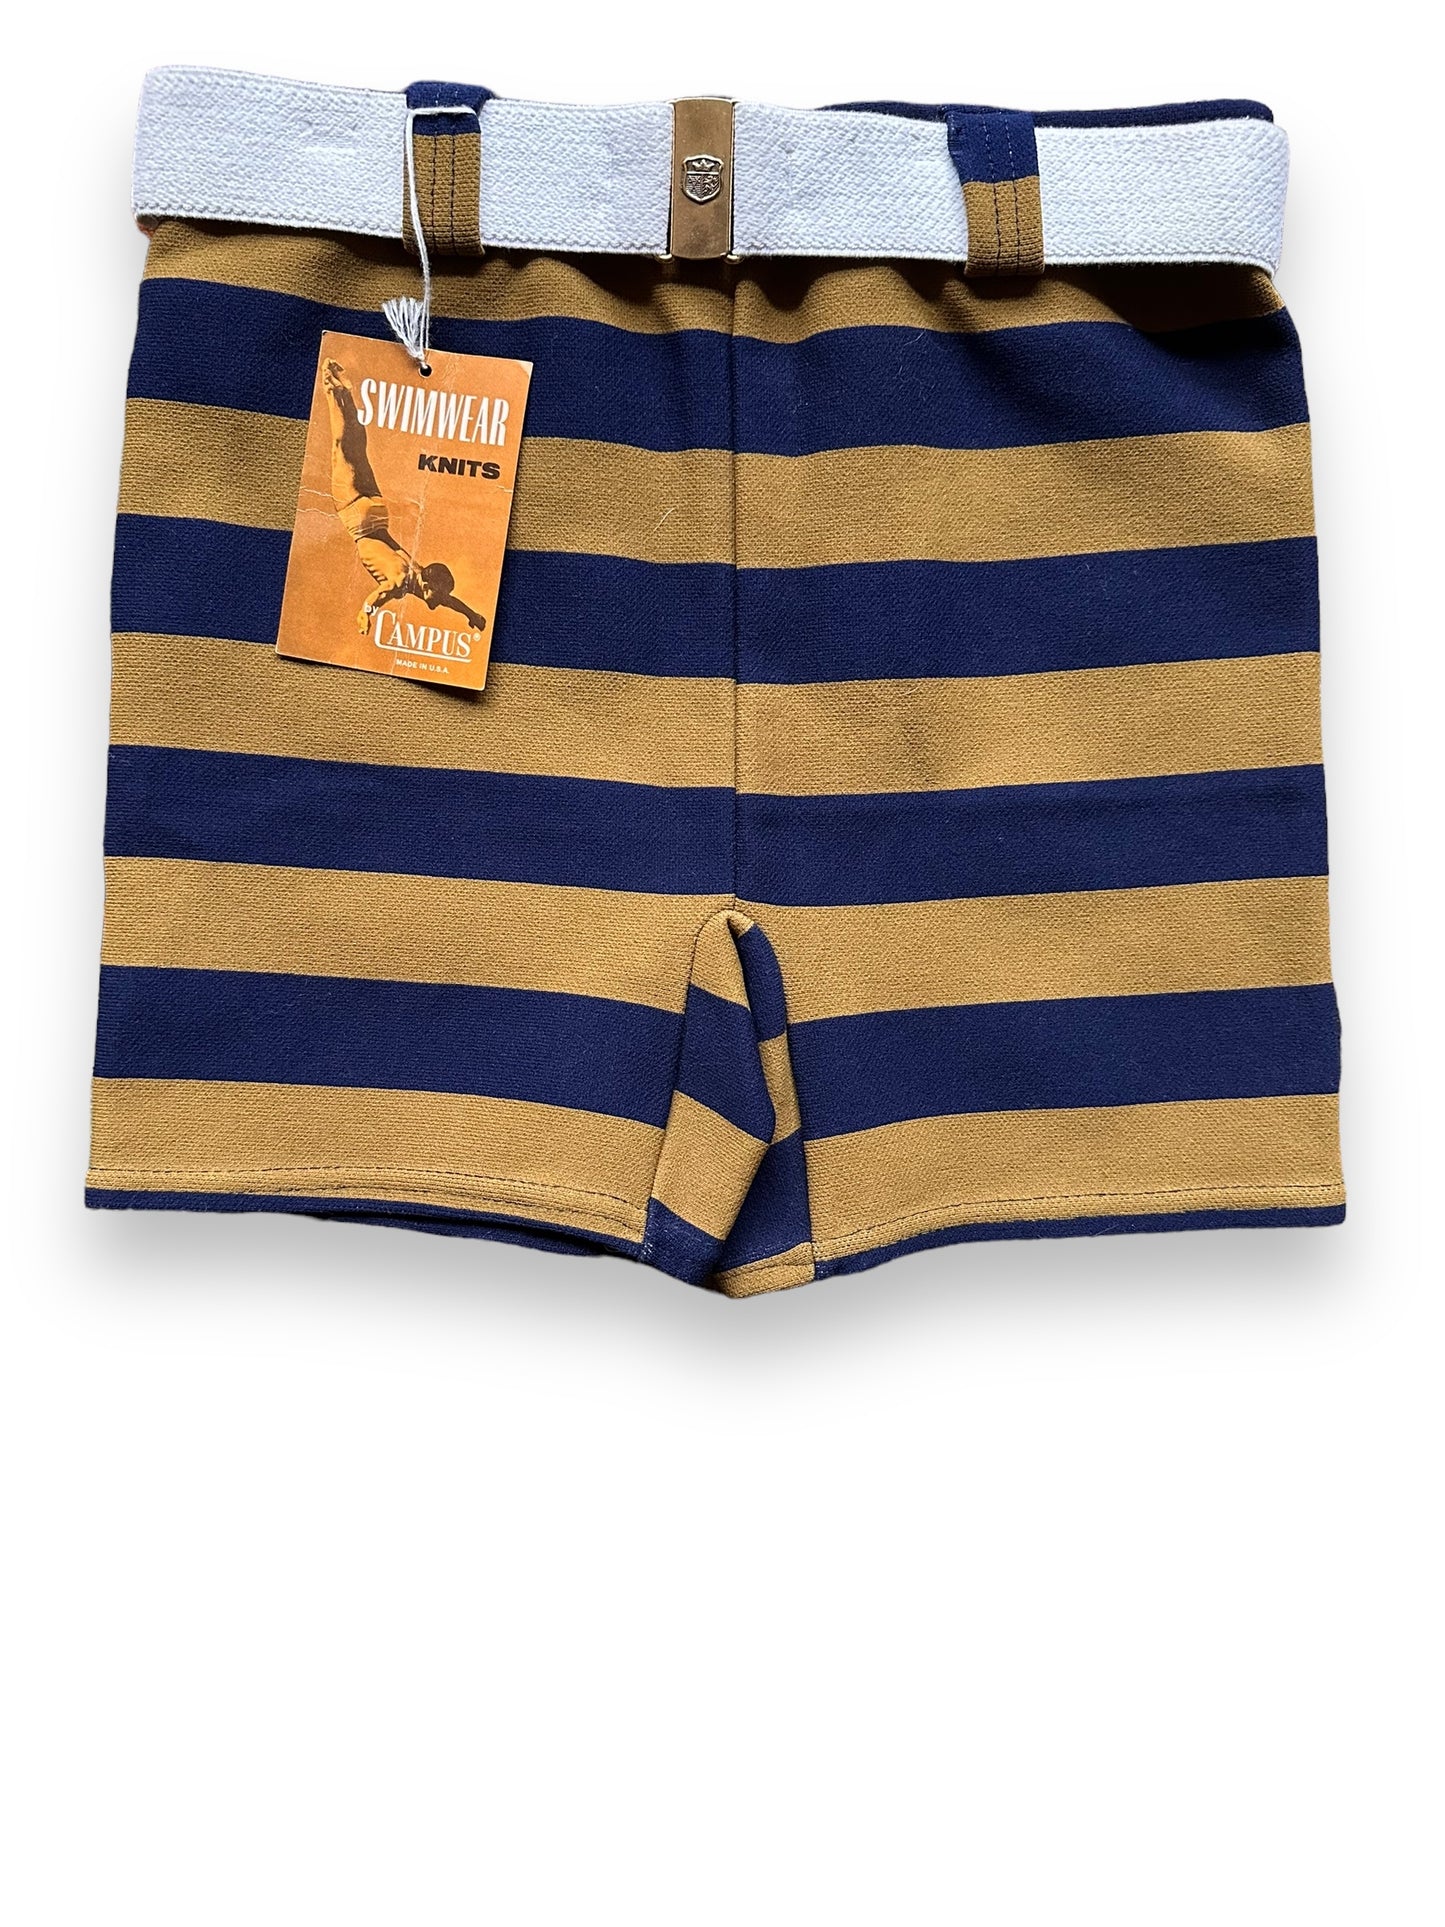 Front View of New Old Stock Bathing Suit By Campus SZ M | Barn Owl Vintage Seattle | Vintage Beachwear Seattle